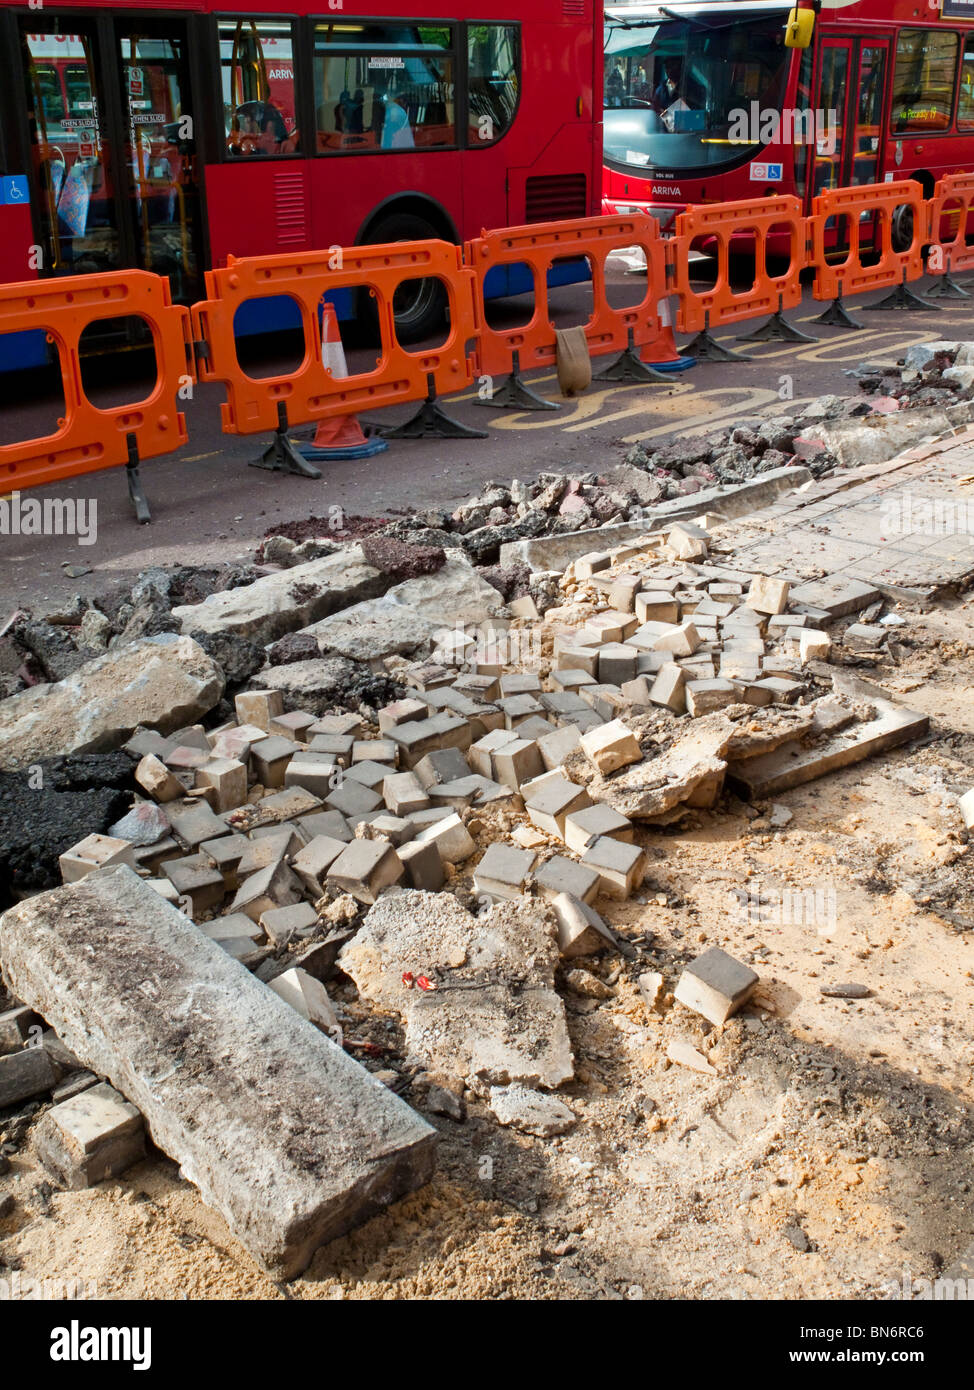 Pavement and roadworks with buses behind in Upper Street Islington north London England UK Stock Photo